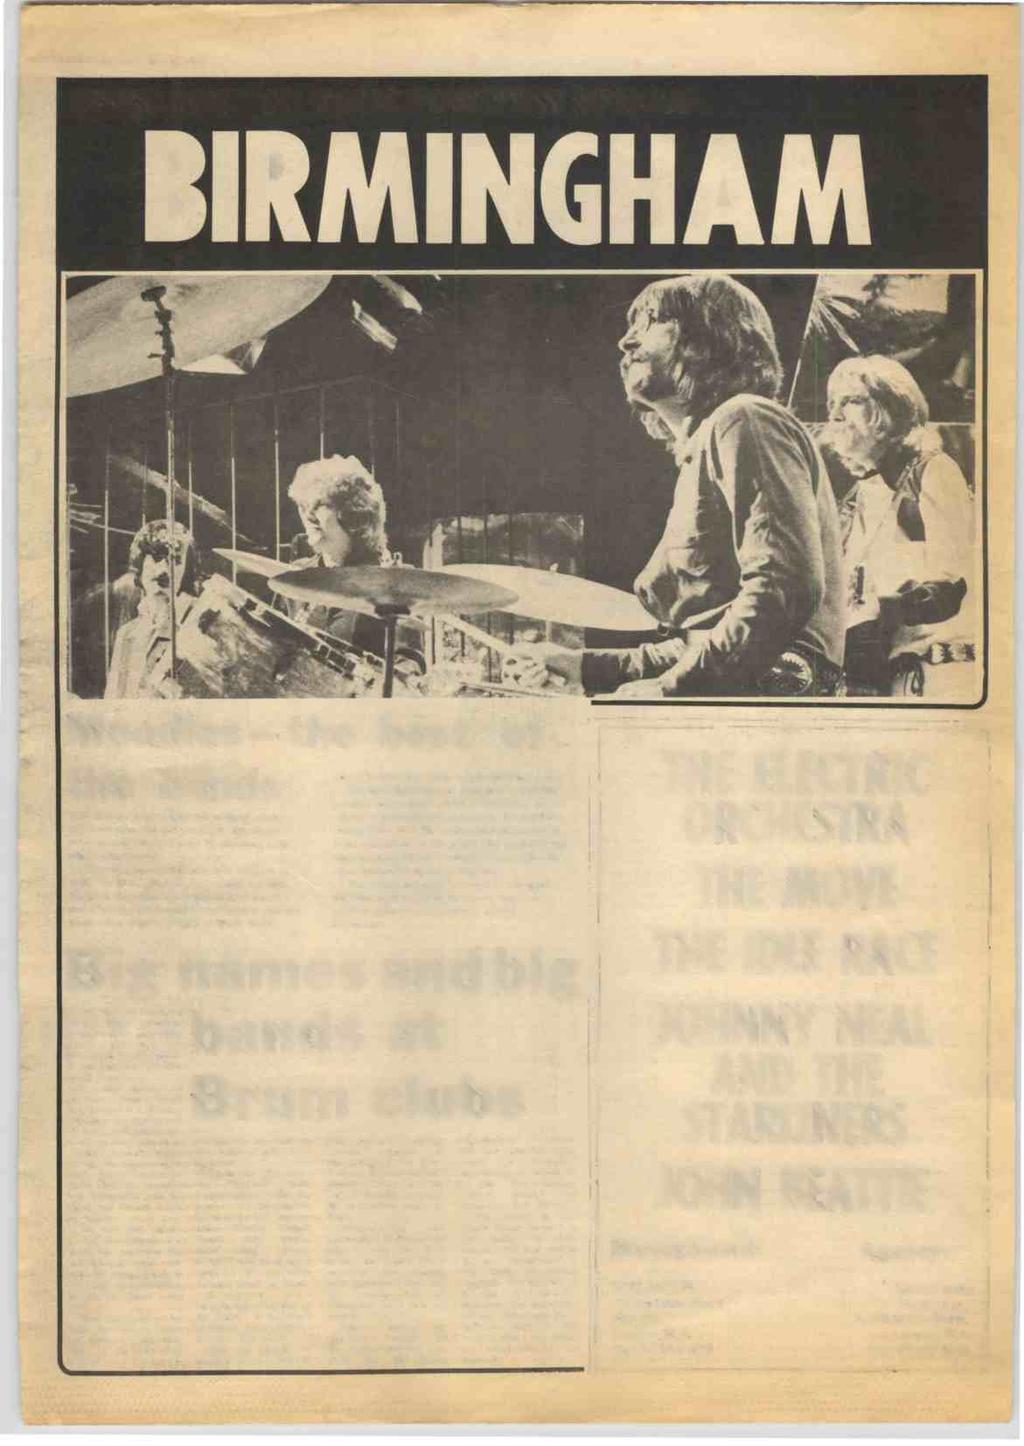 RECORD MIRROR, May 15, 1971 11 SPOTLIGHT ON YOUR TOWN RM SPECIAL BIRMINGHAM Moodies the best of the bands THE Moody Blues (right) are without doubt the most powerful and musically significant band to